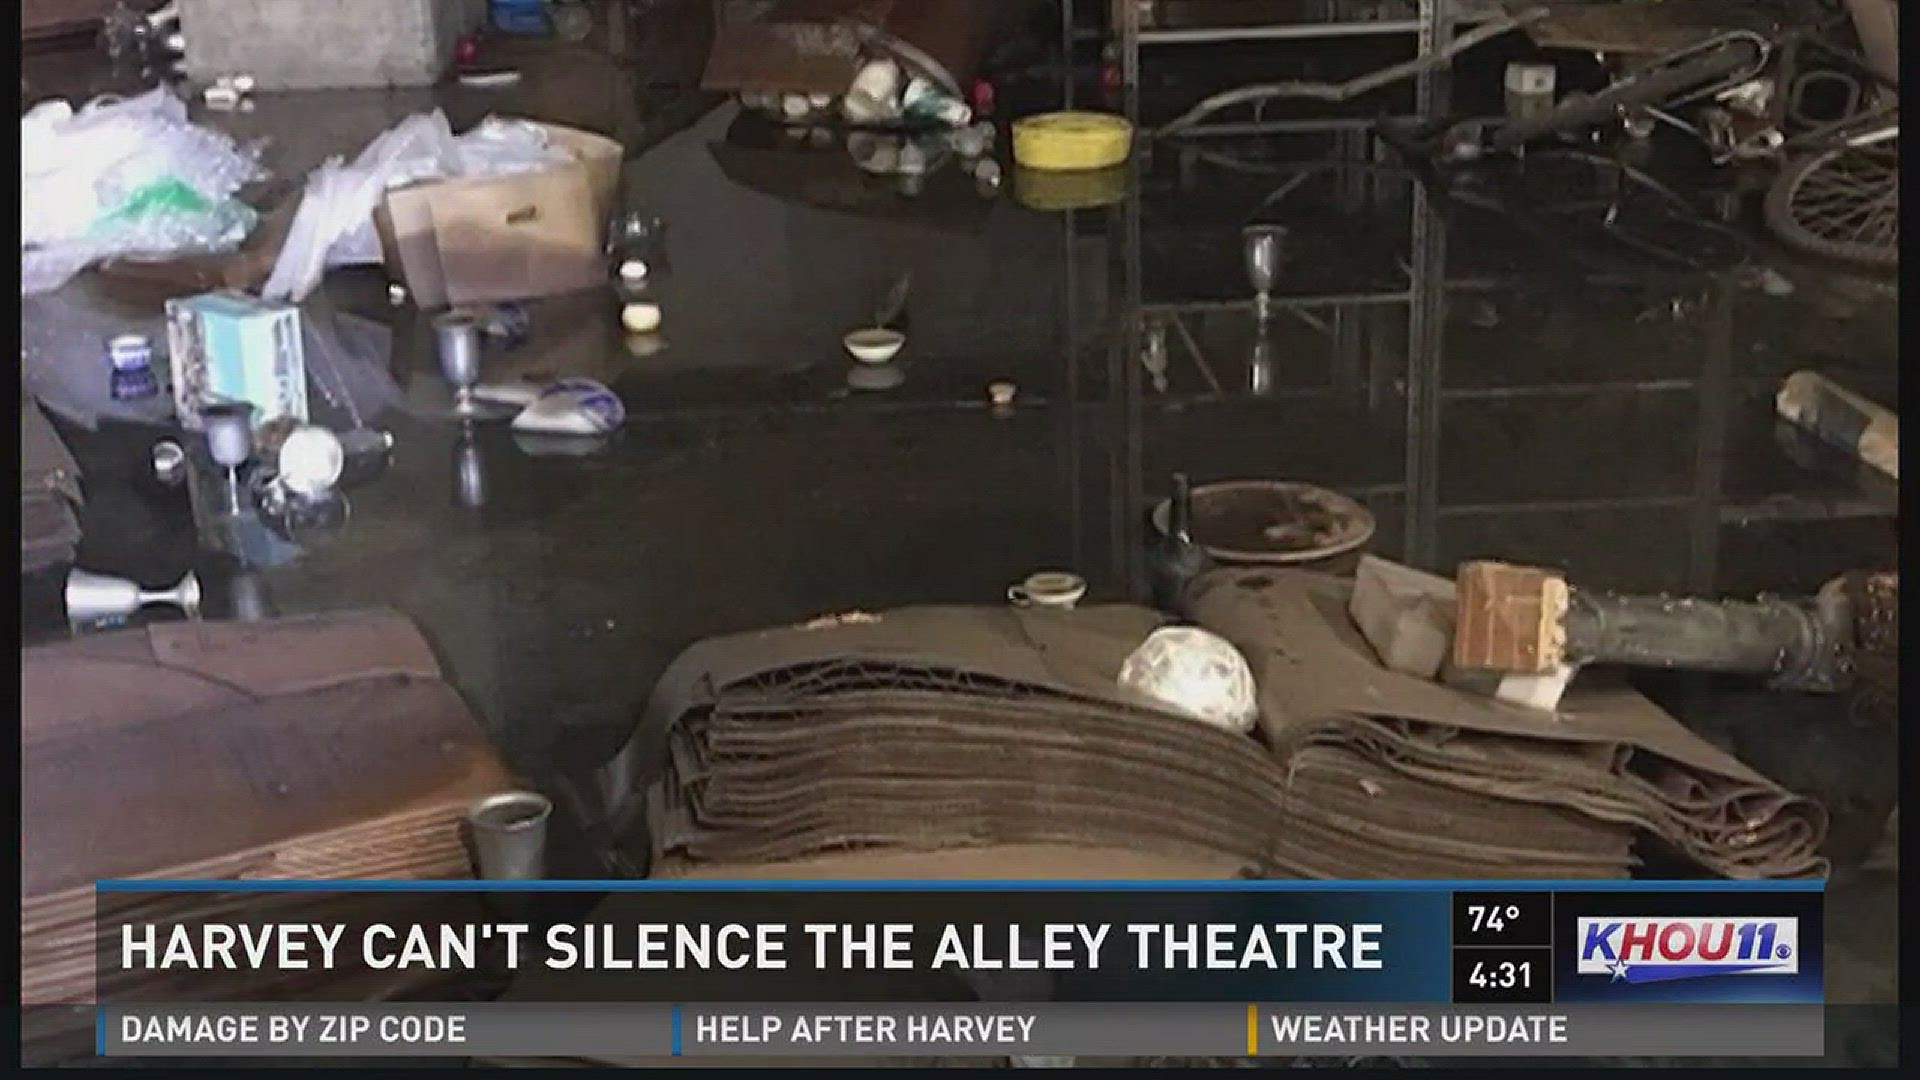 Prop master Karin Rabe still remembers the first time she stepped foot inside the Alley Theatre after Hurricane Harvey.